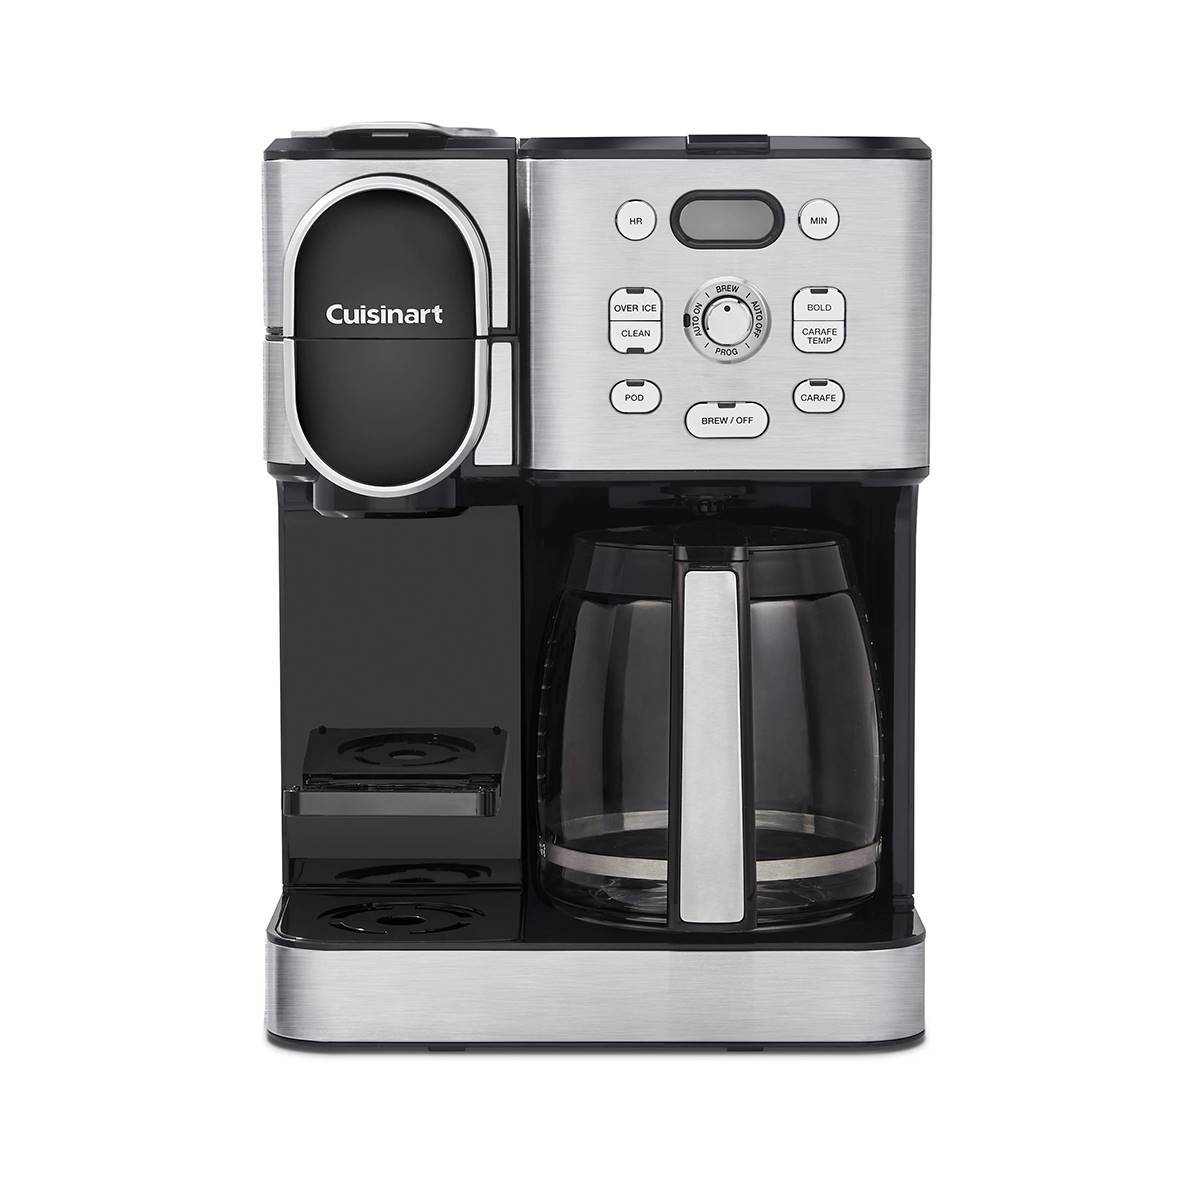 Cuisinart(R) 12-Cup Carafe Stainless Steel Coffee Maker